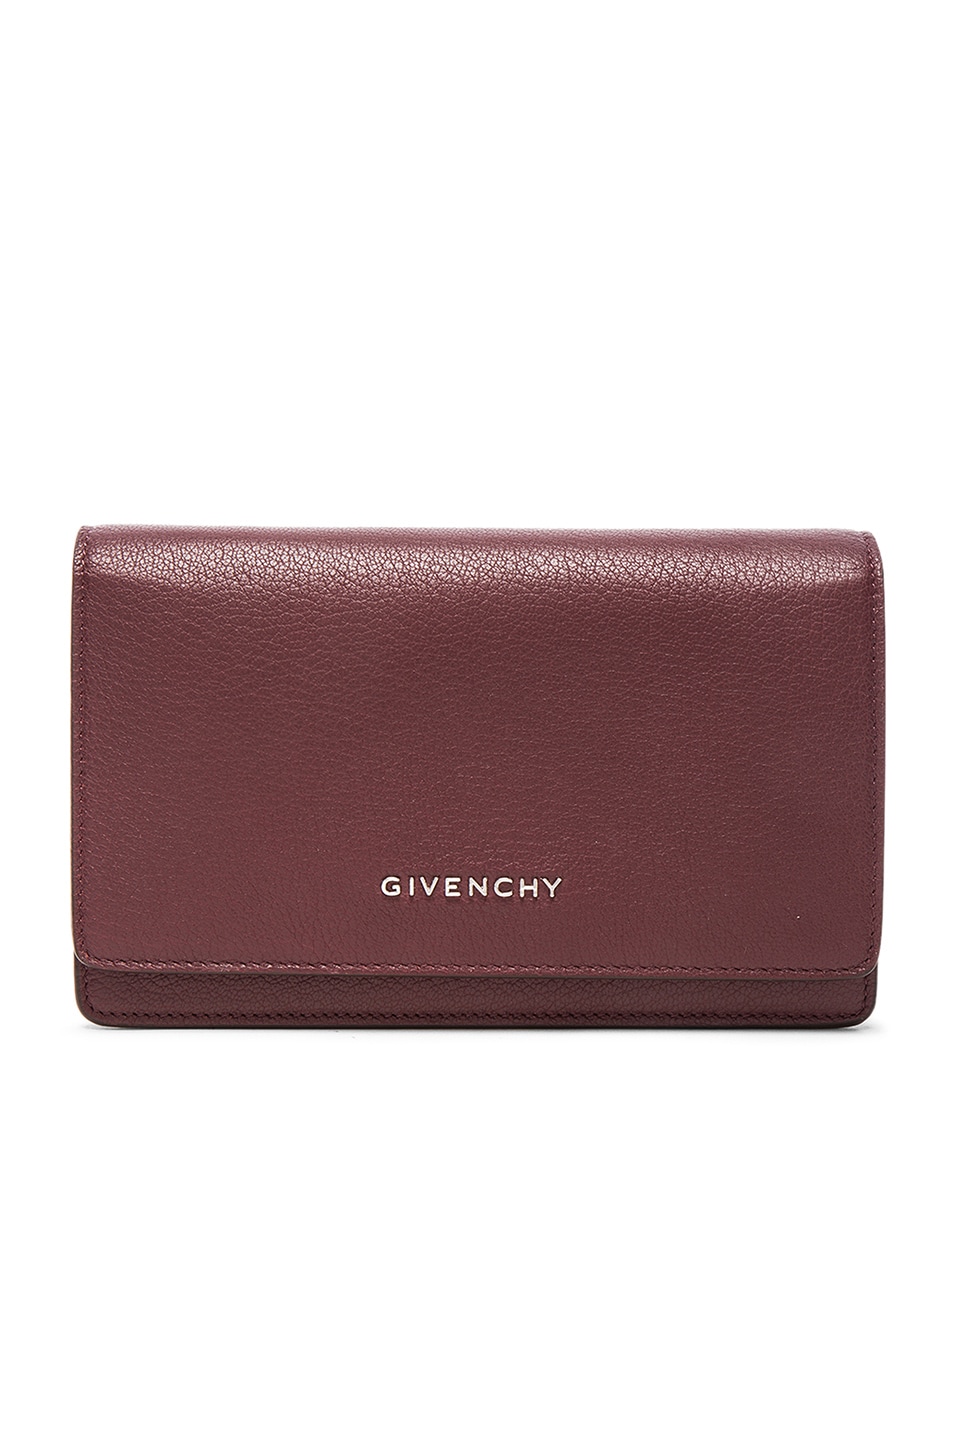 Image 1 of Givenchy Pandora Chain Wallet in Oxblood